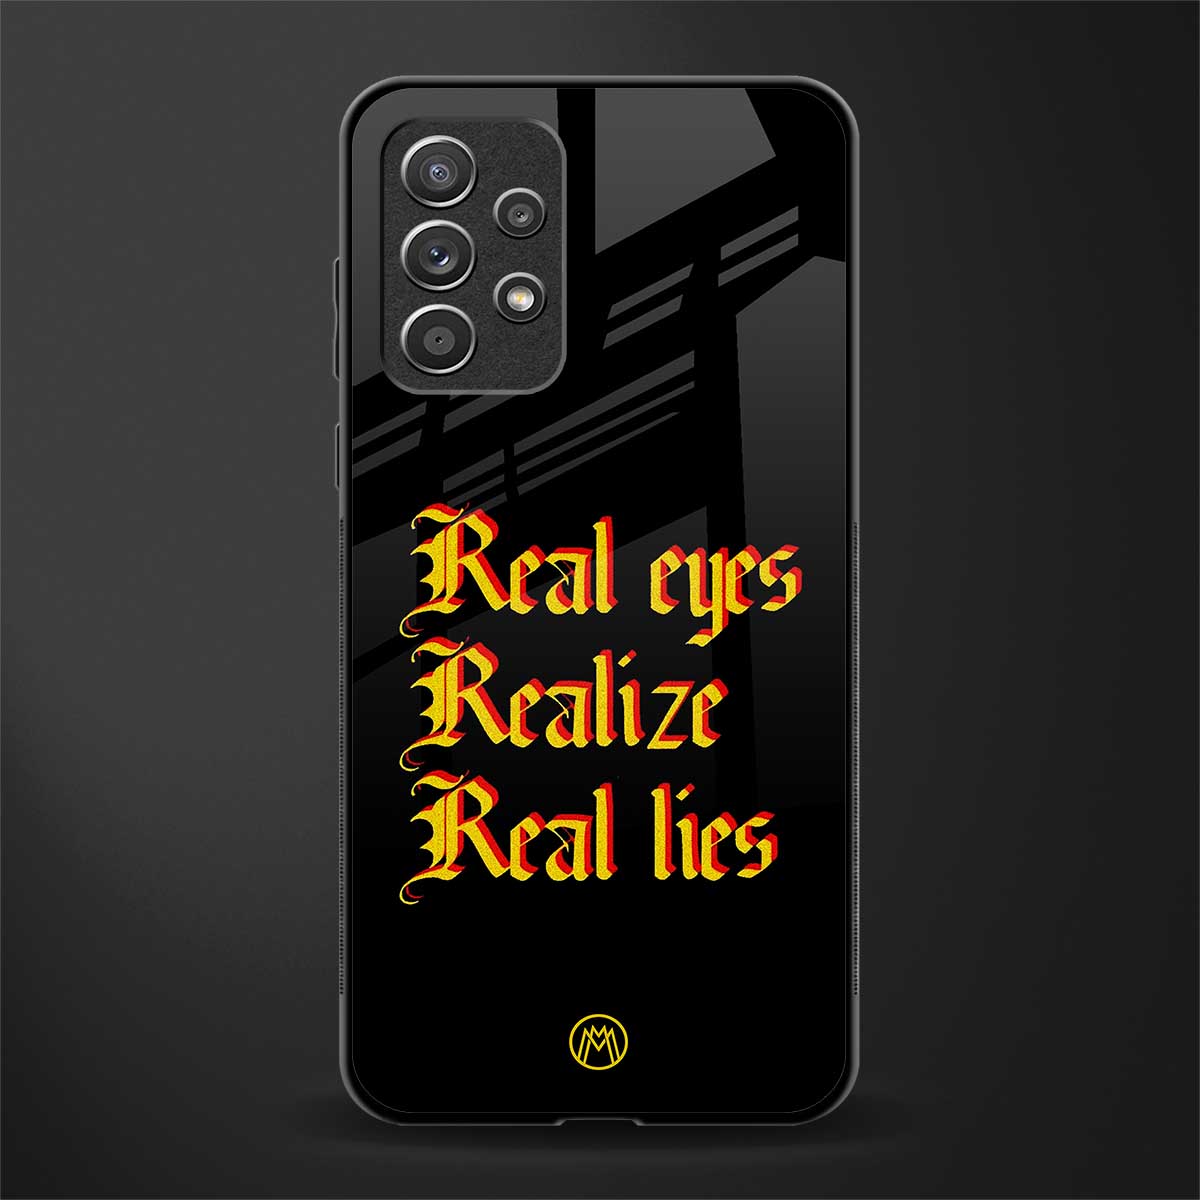 real eyes realize real lies quote glass case for samsung galaxy a52s 5g image